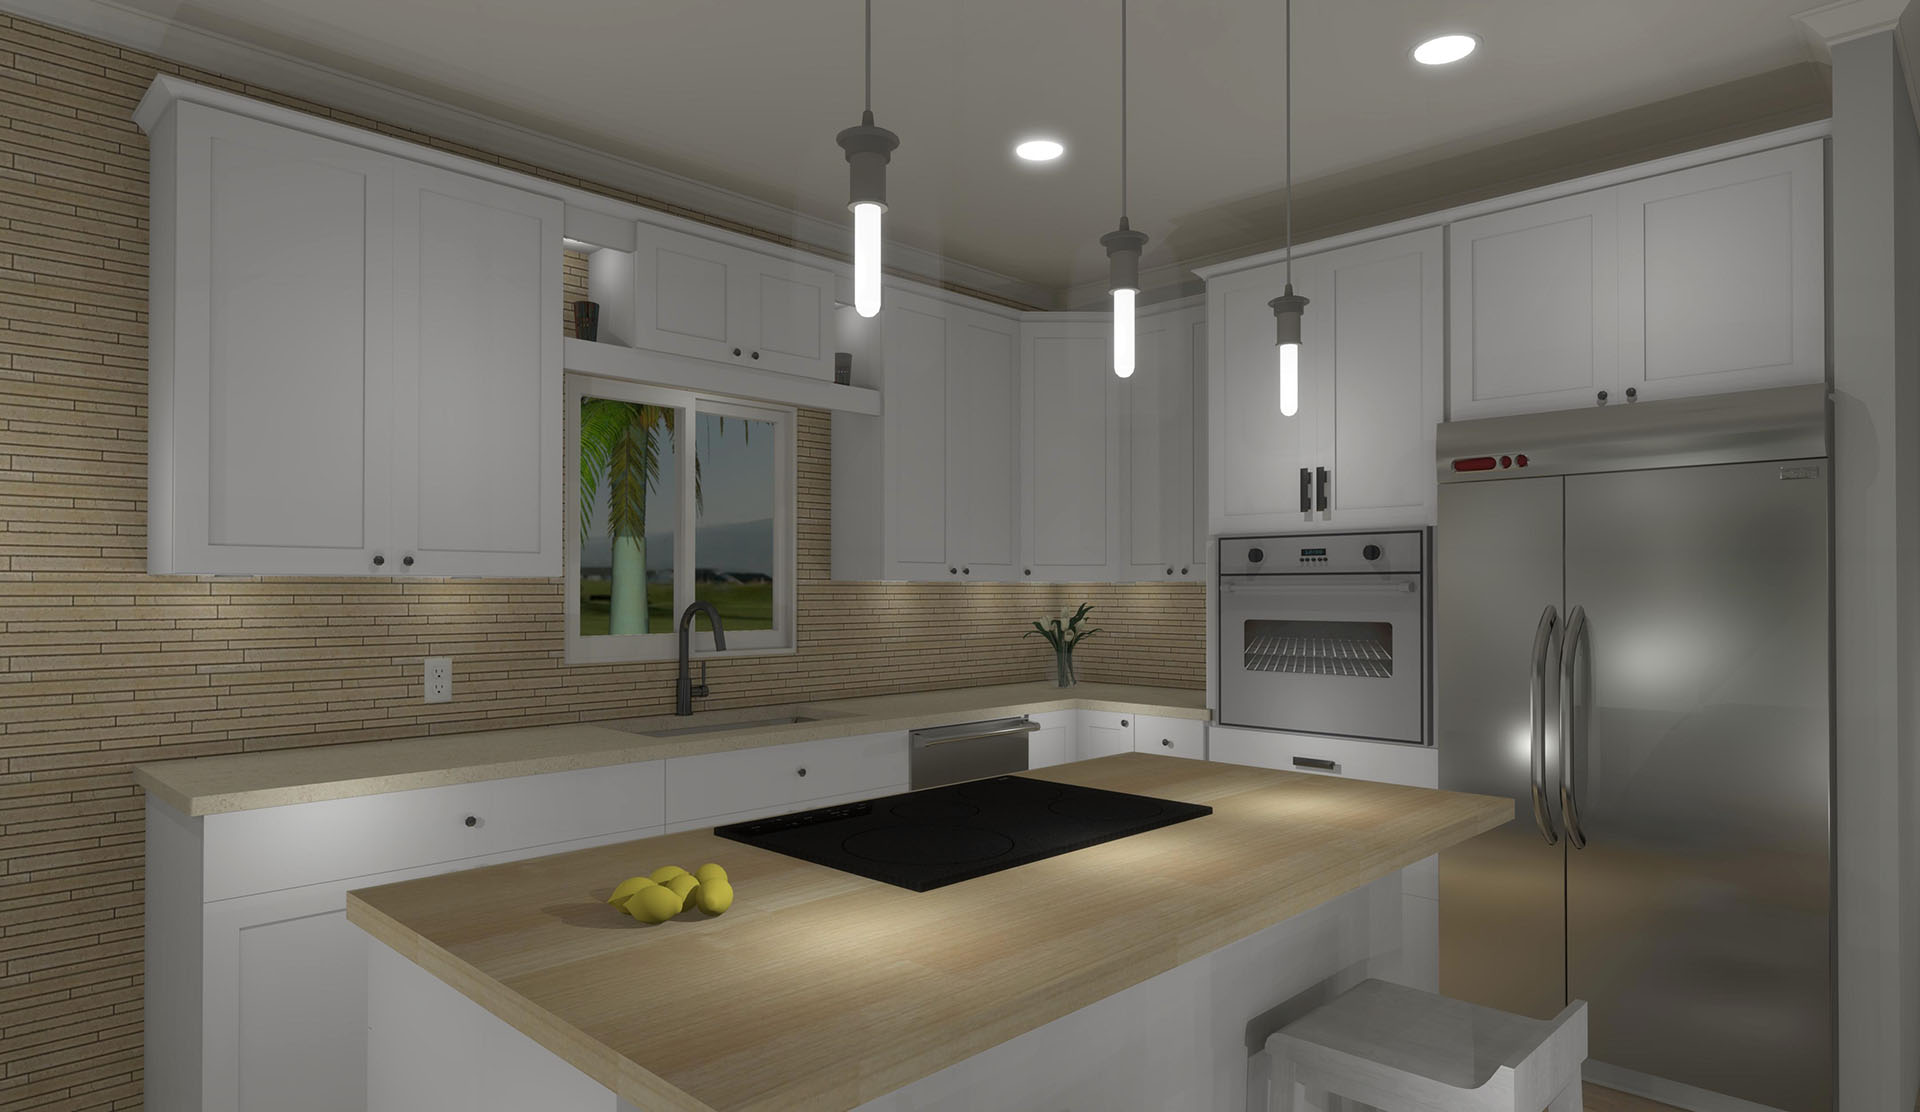 White kitchen cabinets with light colored wood and a lighting fixture on the ceiling